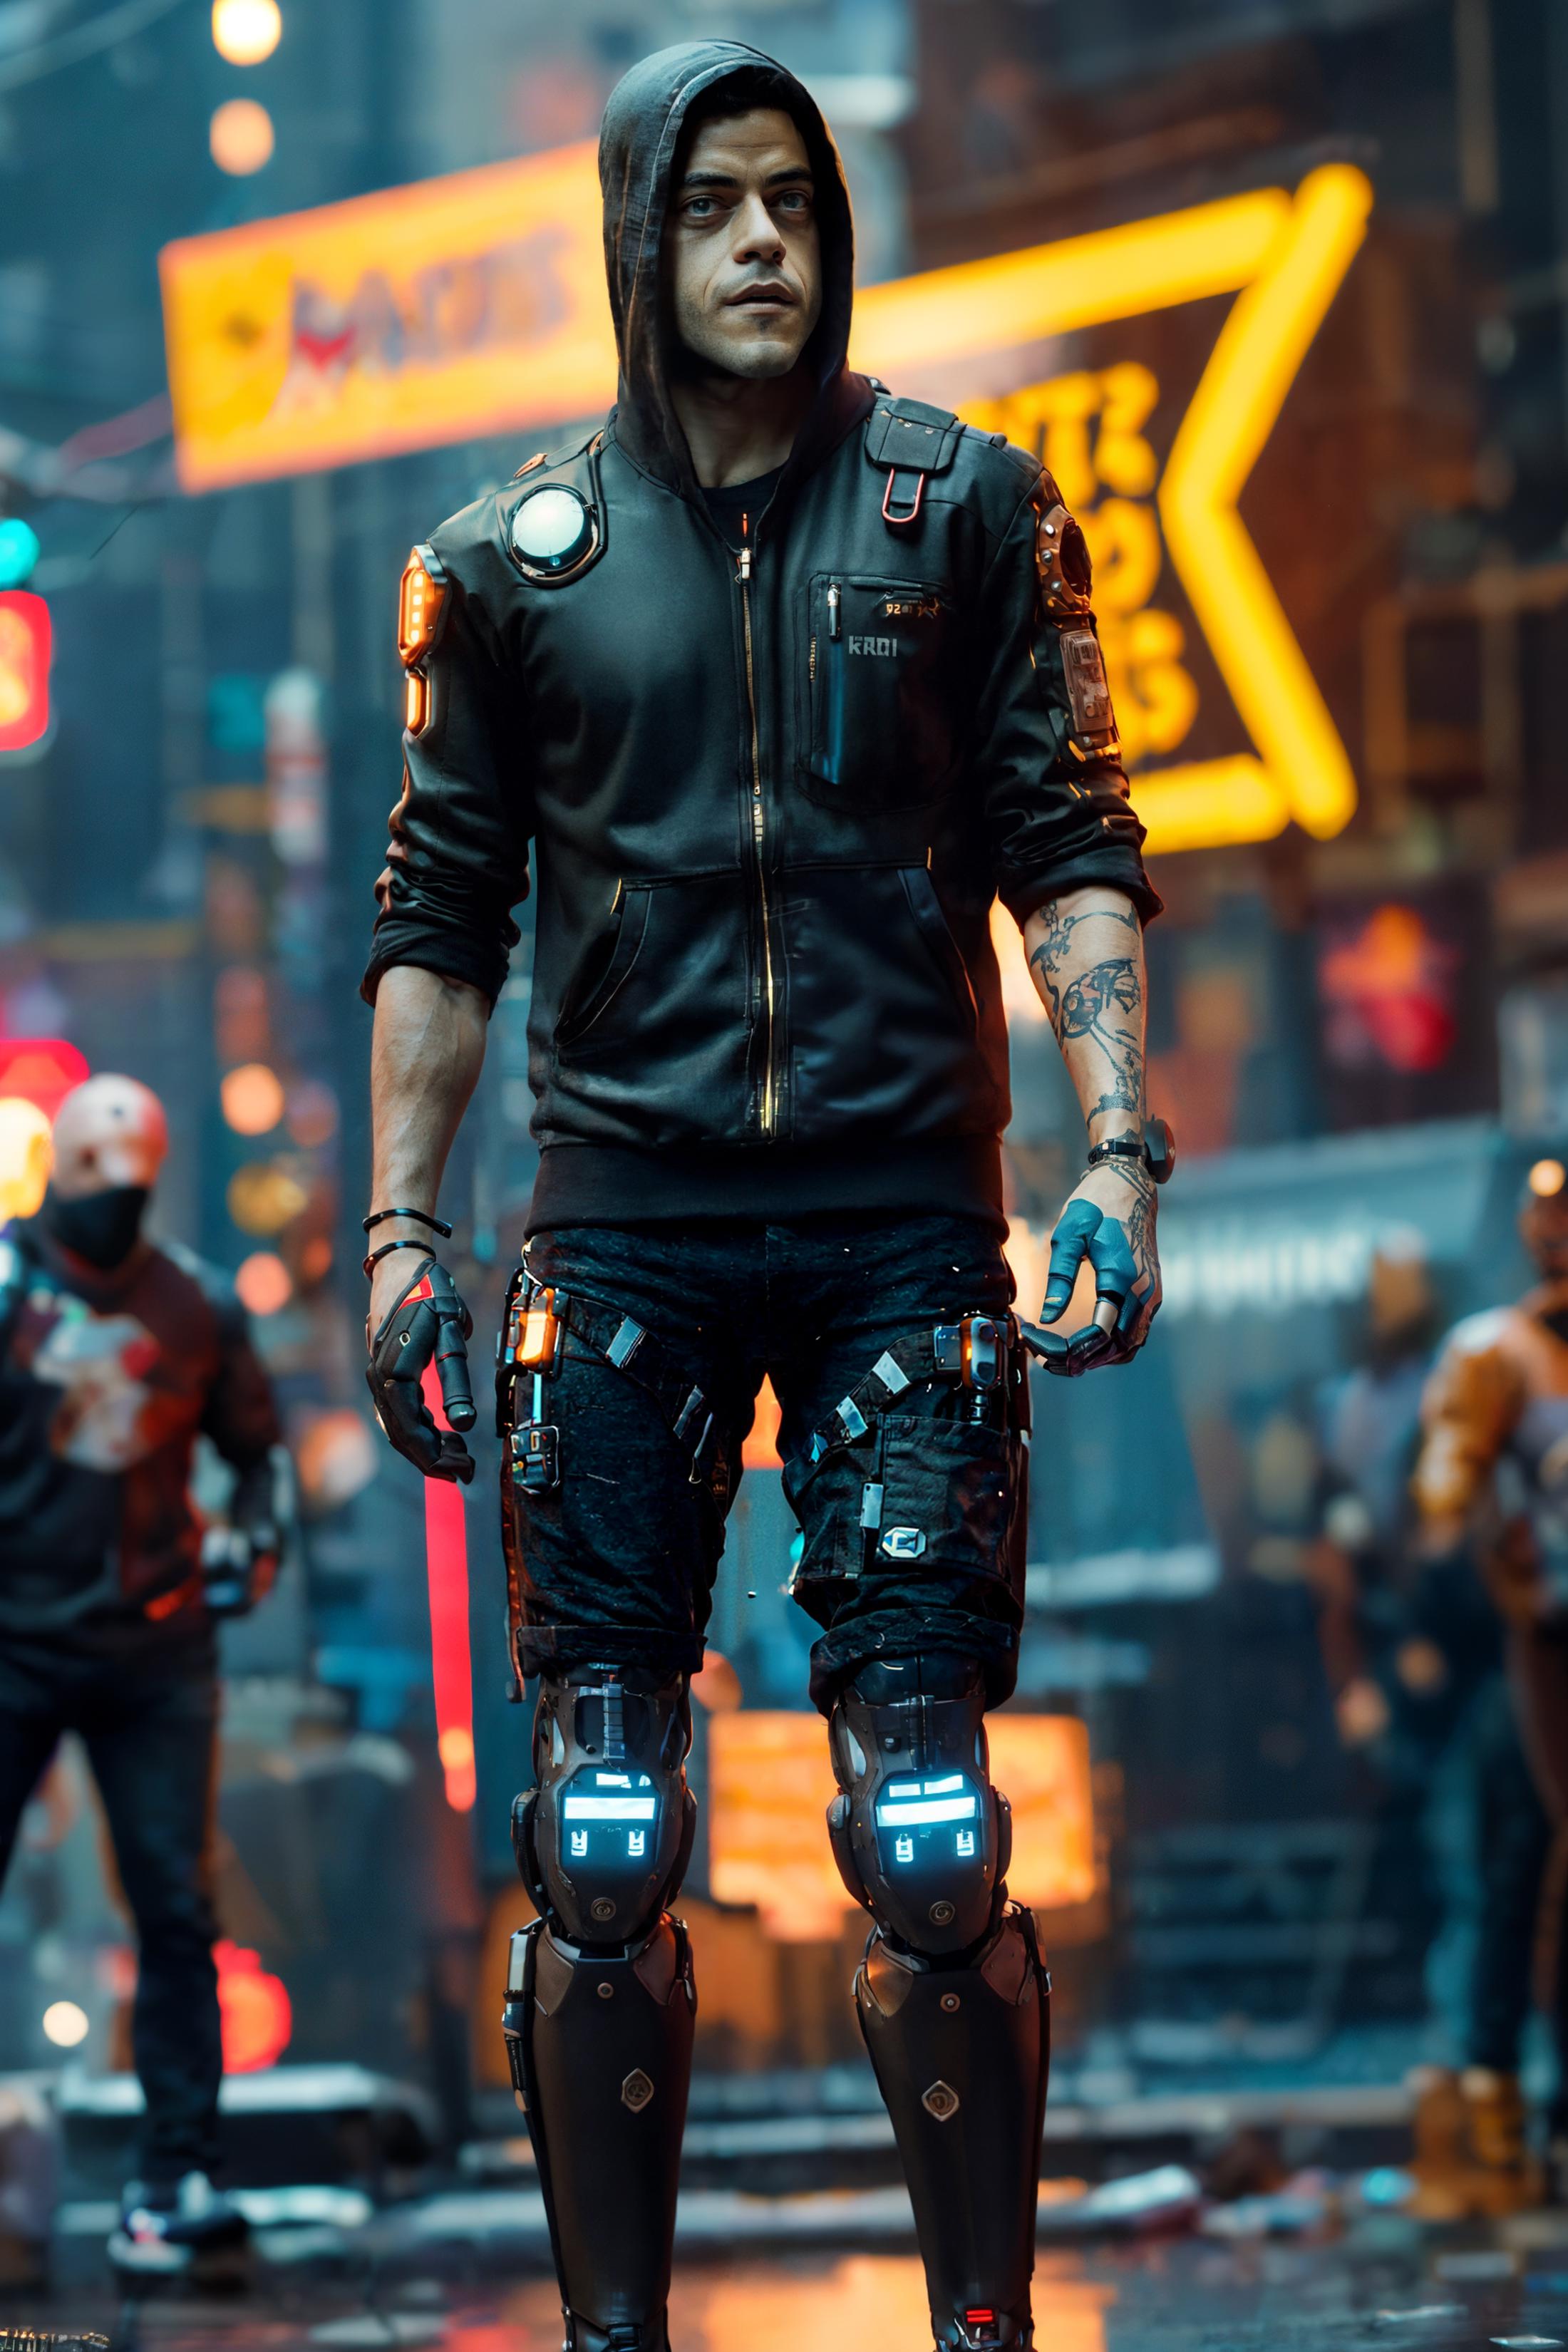 A man wearing a black jacket and cybernetic legs in a futuristic setting.